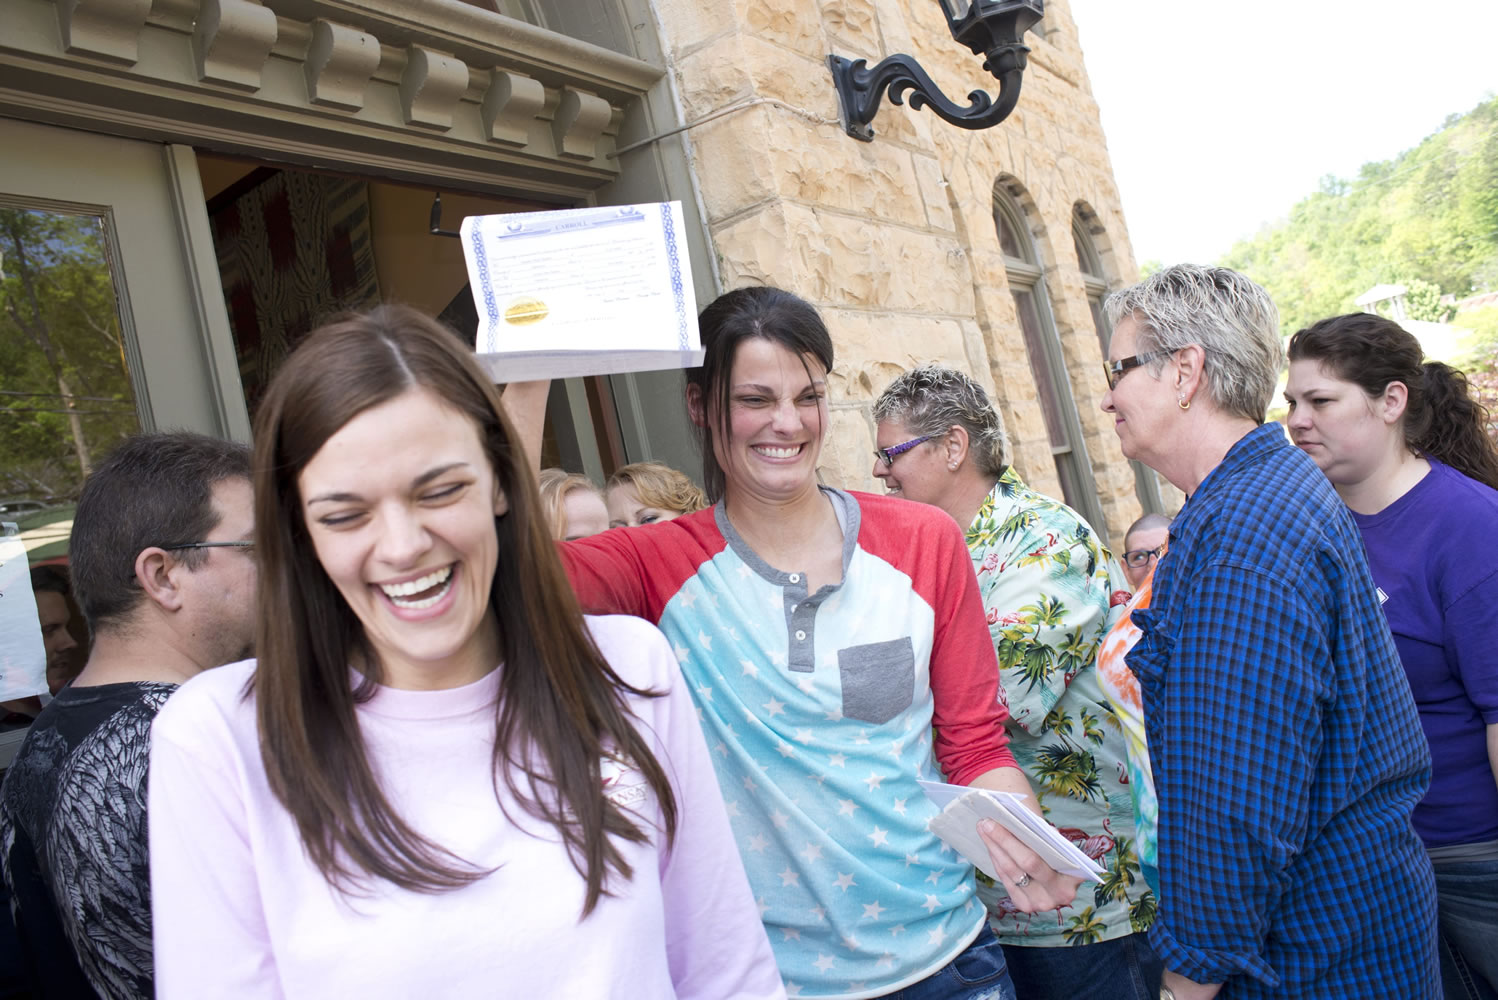 Kristin Seaton, center, of Jacksonville, Ark., holds up her marriage license as she leaves the Carroll County Courthouse in Eureka Springs, Ark., with her partner, Jennifer Rambo.